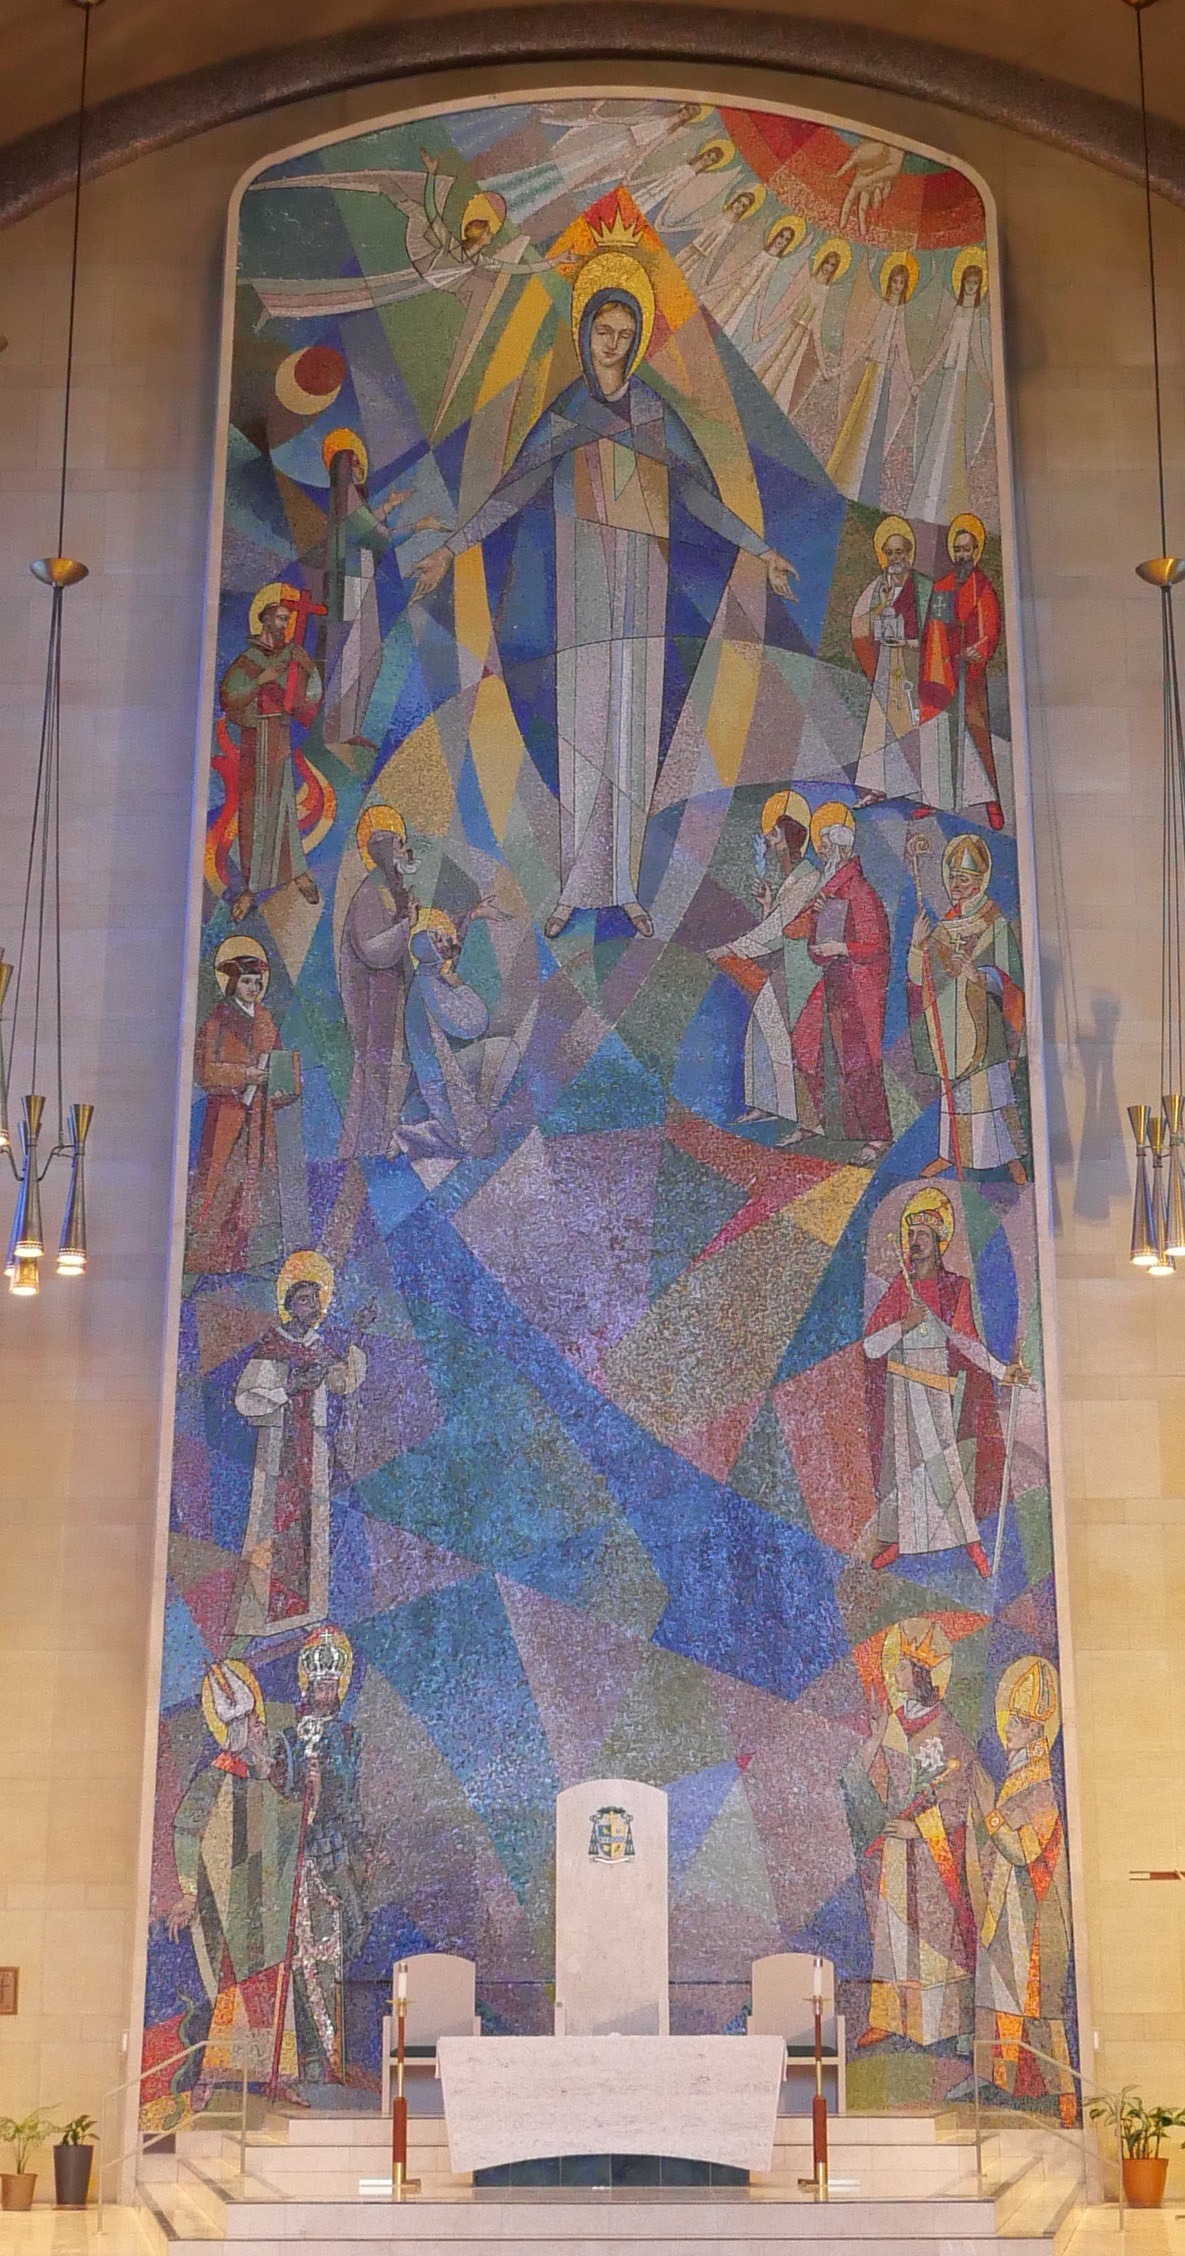 St. Columba Cathedral Mosaic. Photo by Michael Houy